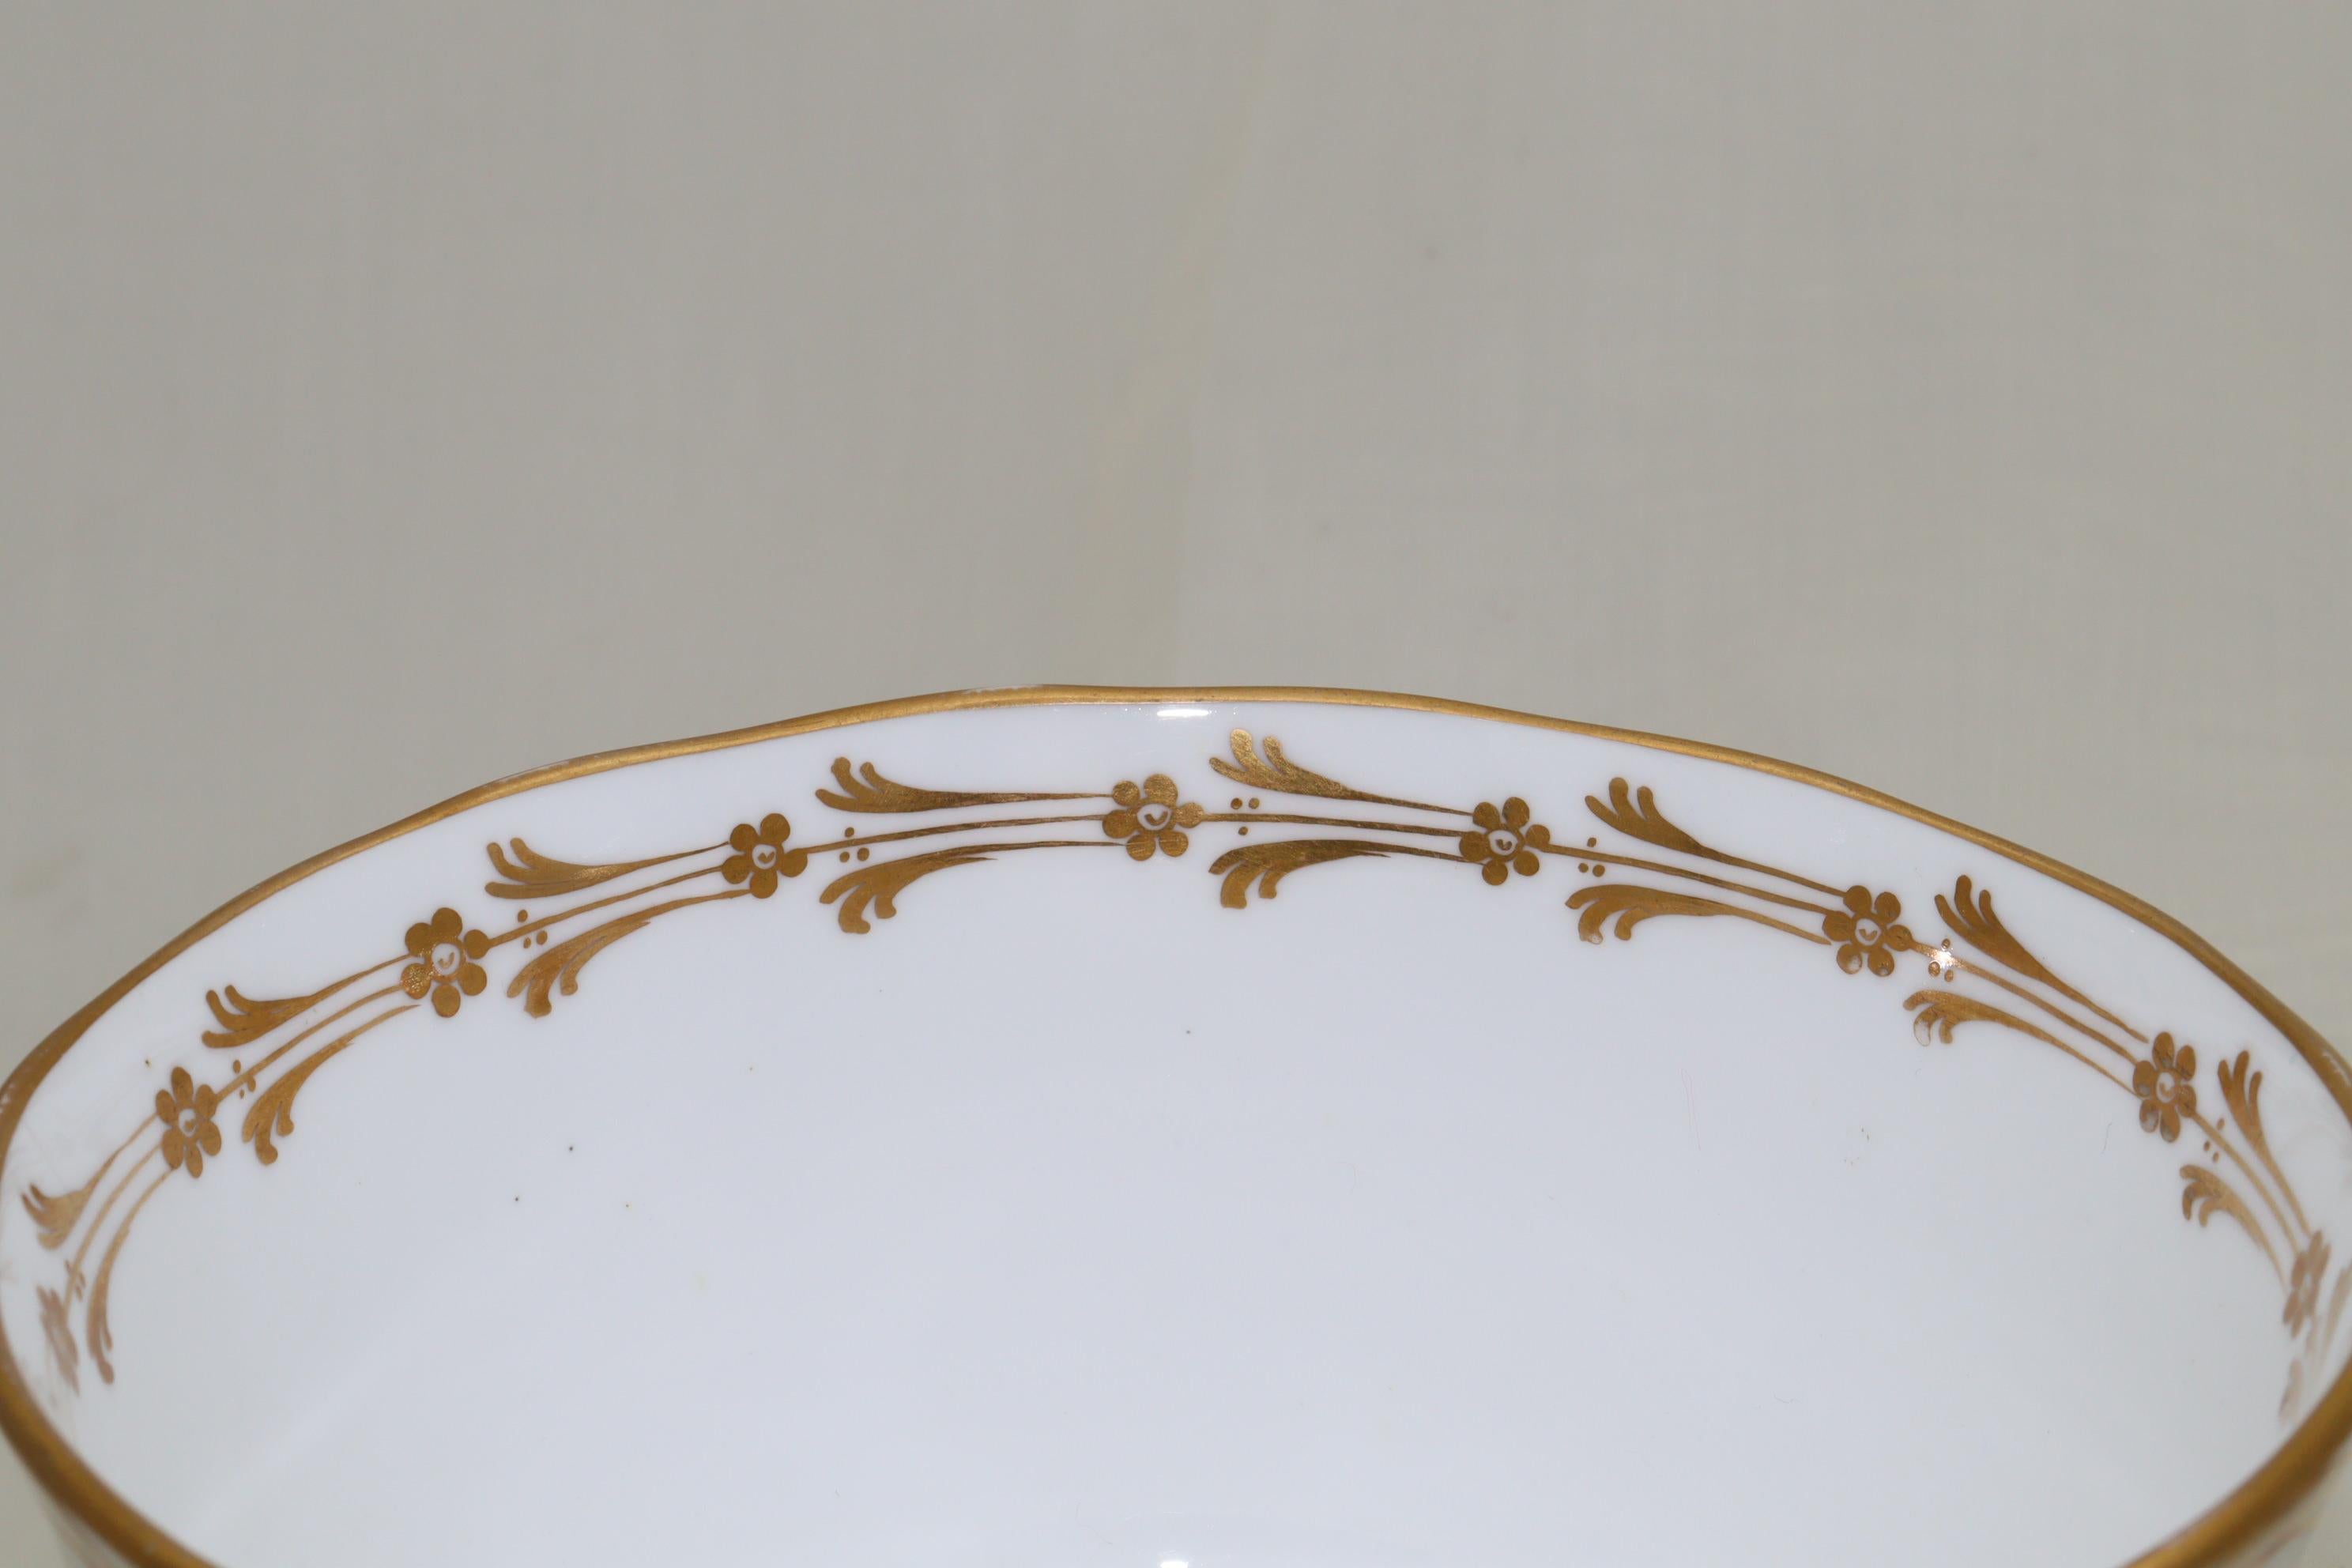 This Davenport porcelain slop bowl is decorated to the outside with a hand gilded pattern that features swags of flowers cascading from two intertwined ribbons that run around the rim. The inner rim carries a band of stylised flowers and there is an